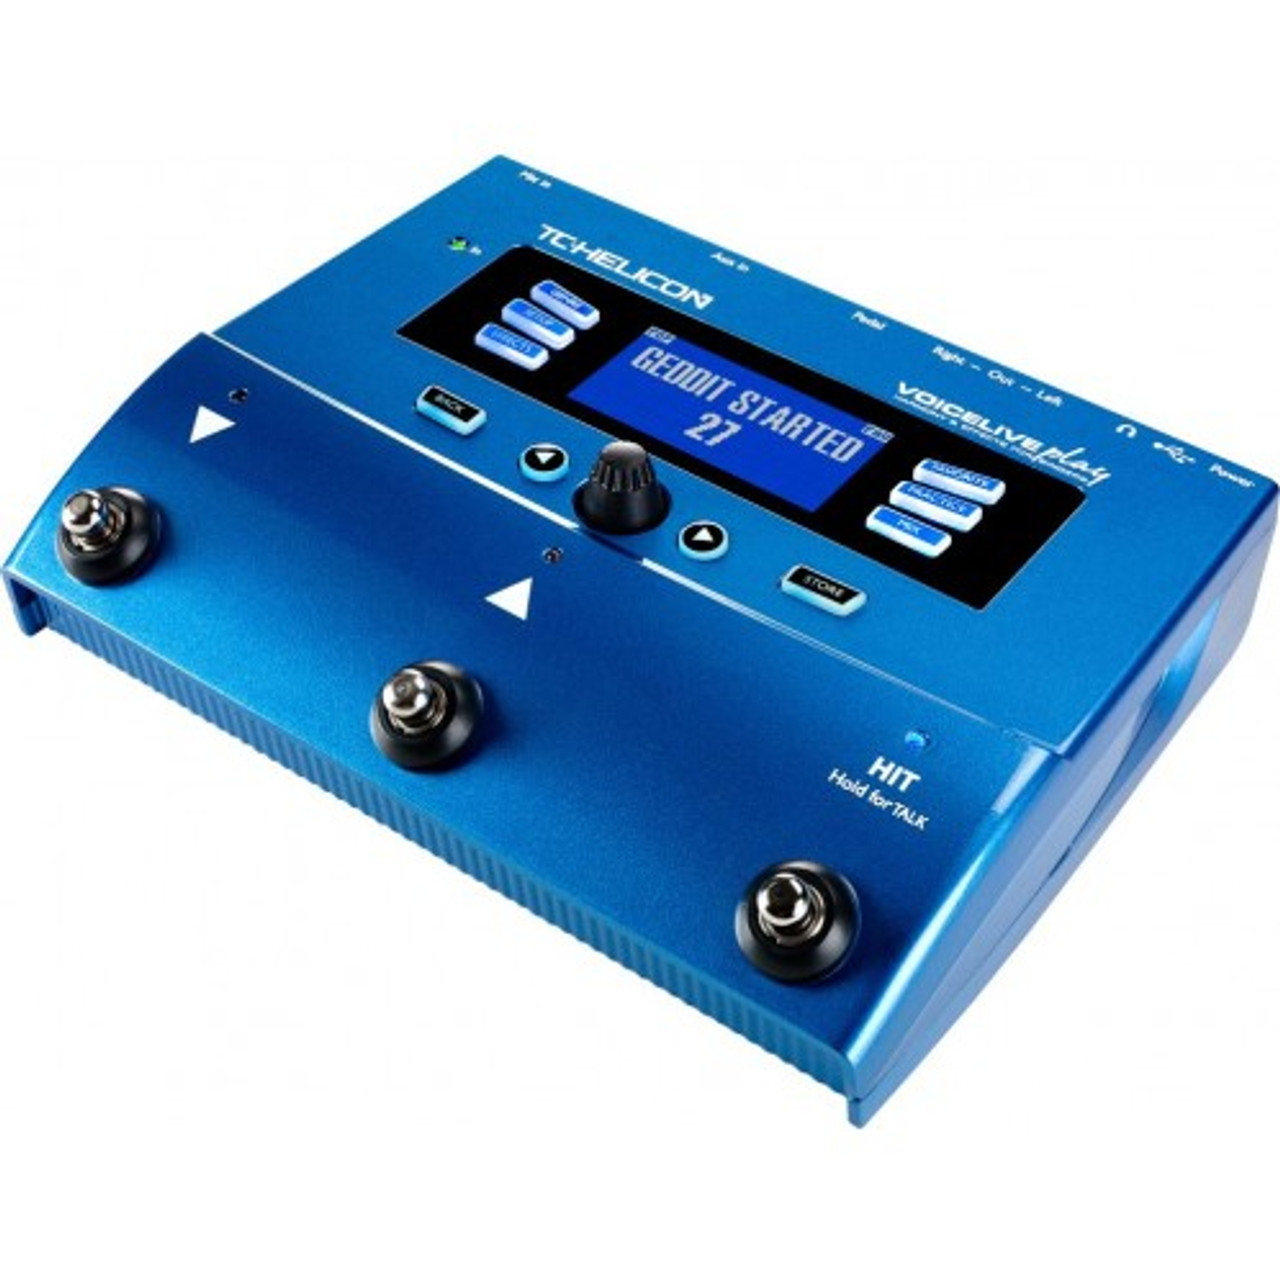 Shop Online For Tc Helicon Voicelive Play Vocal Effects Harmony Processor In Australia Effects Musical Instruments